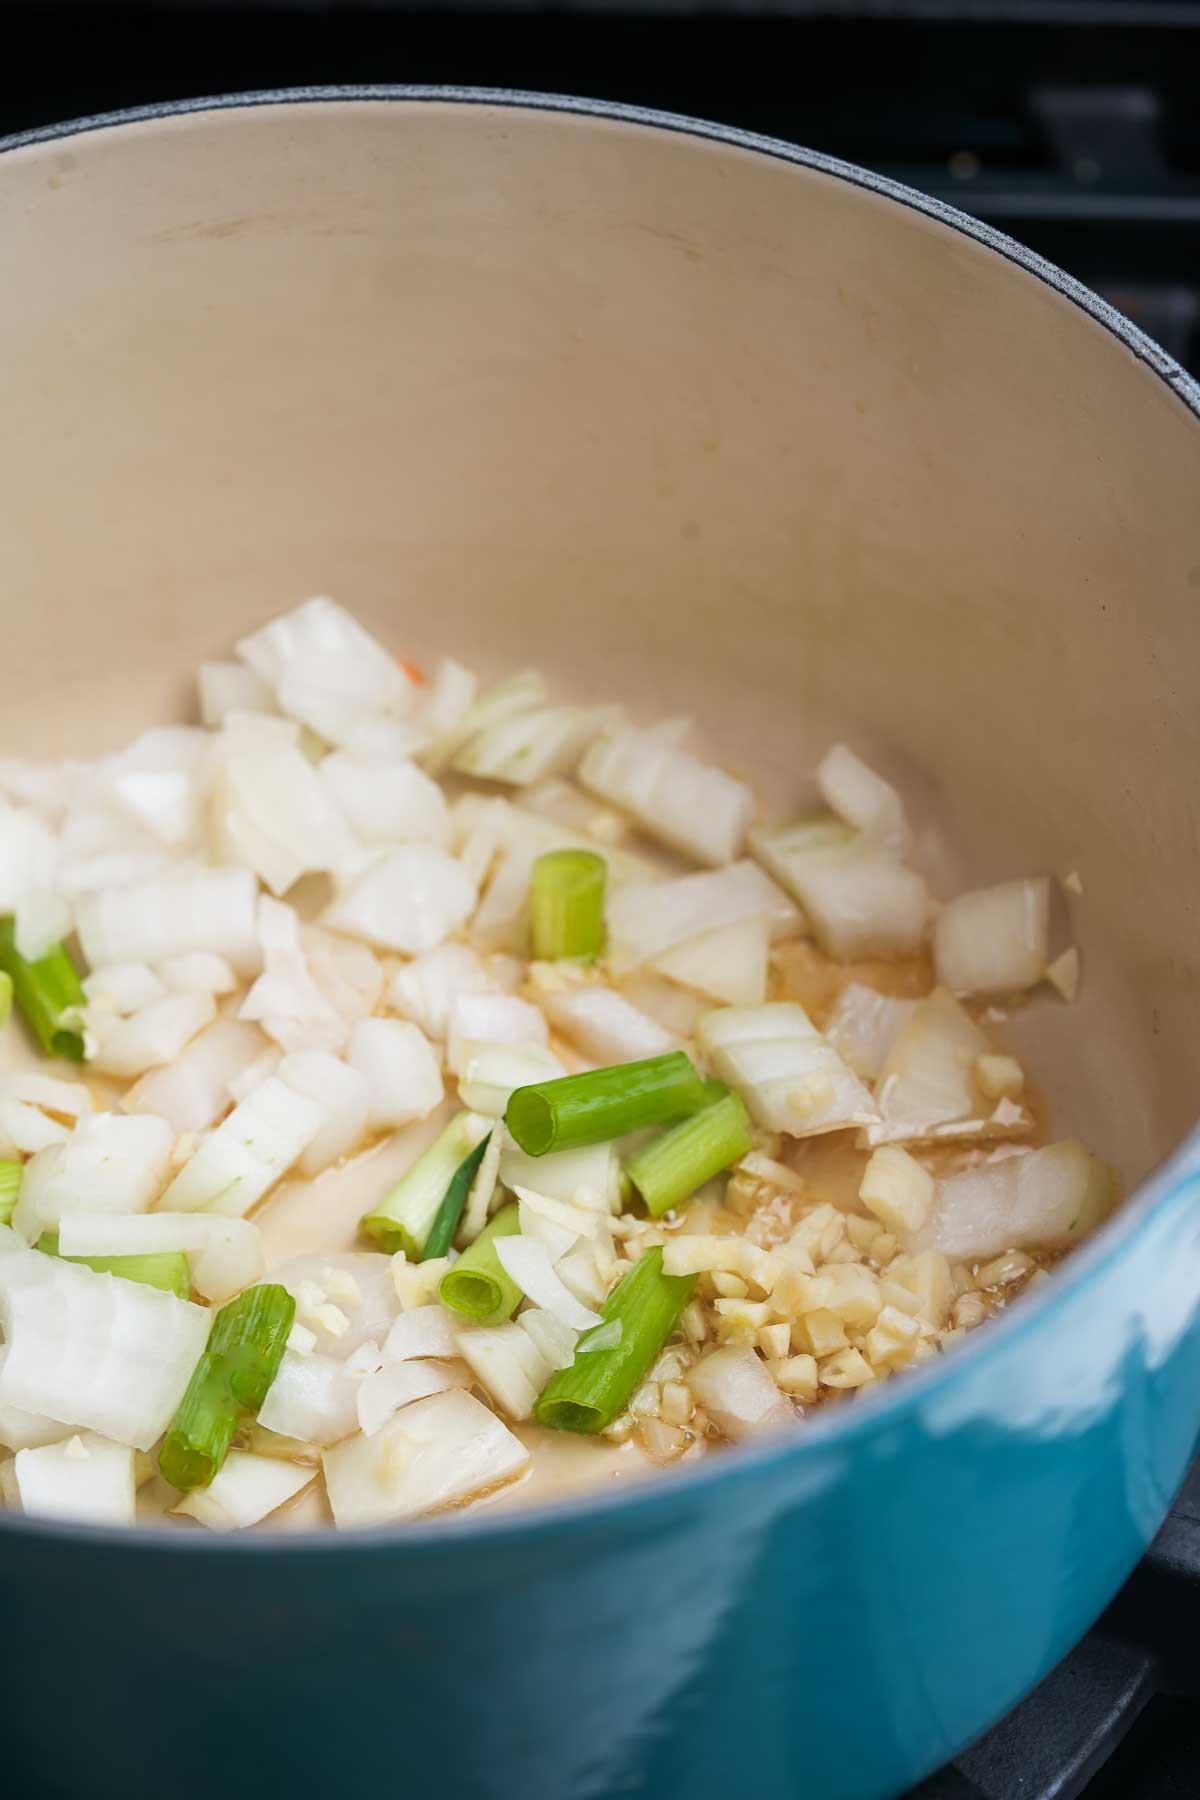 A pot filled with onions, scallions and garlic on the stove.